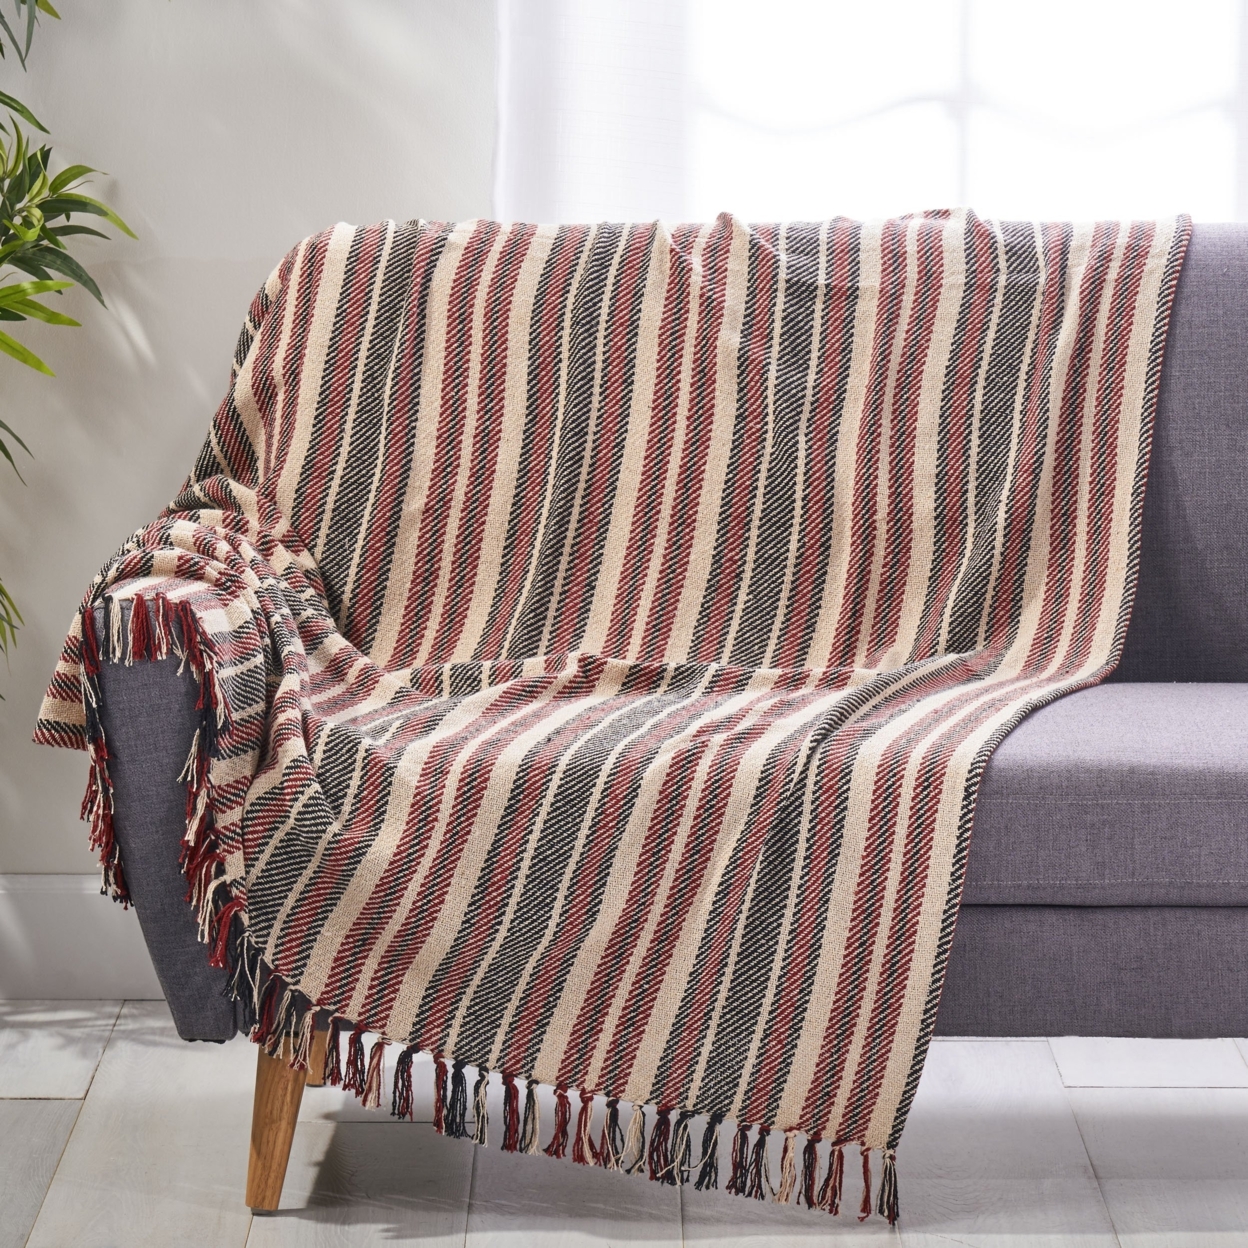 Merna Boho Cotton Throw Blanket - Muted Red/muted Black